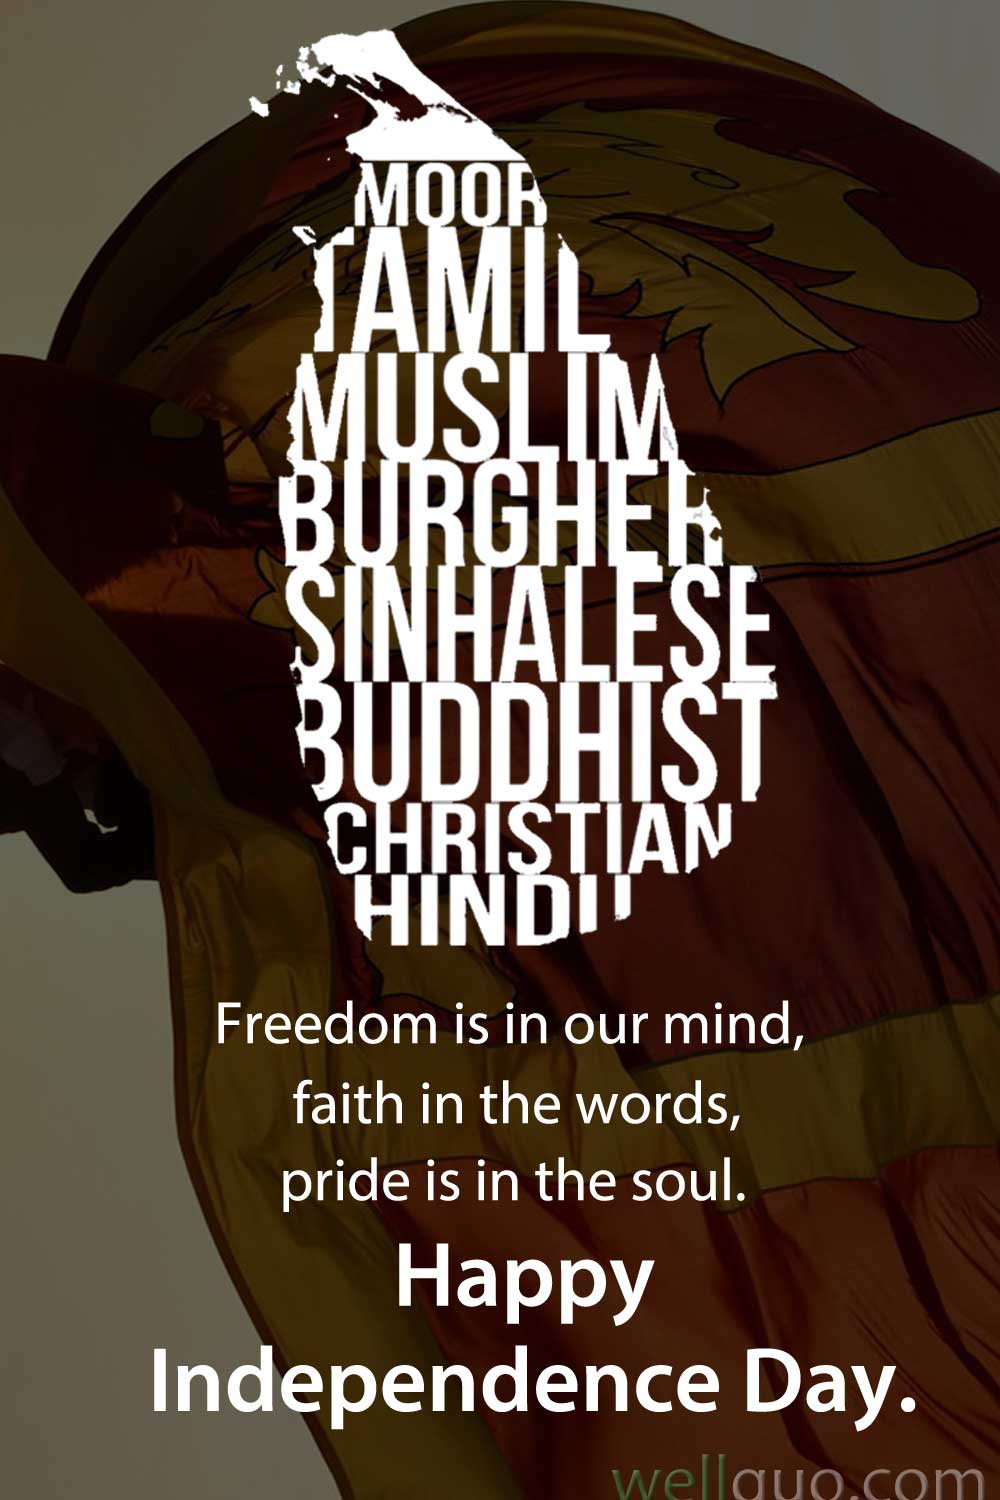 Sri Lanka Independence Day 2021 Quotes & Wishes - Well Quo